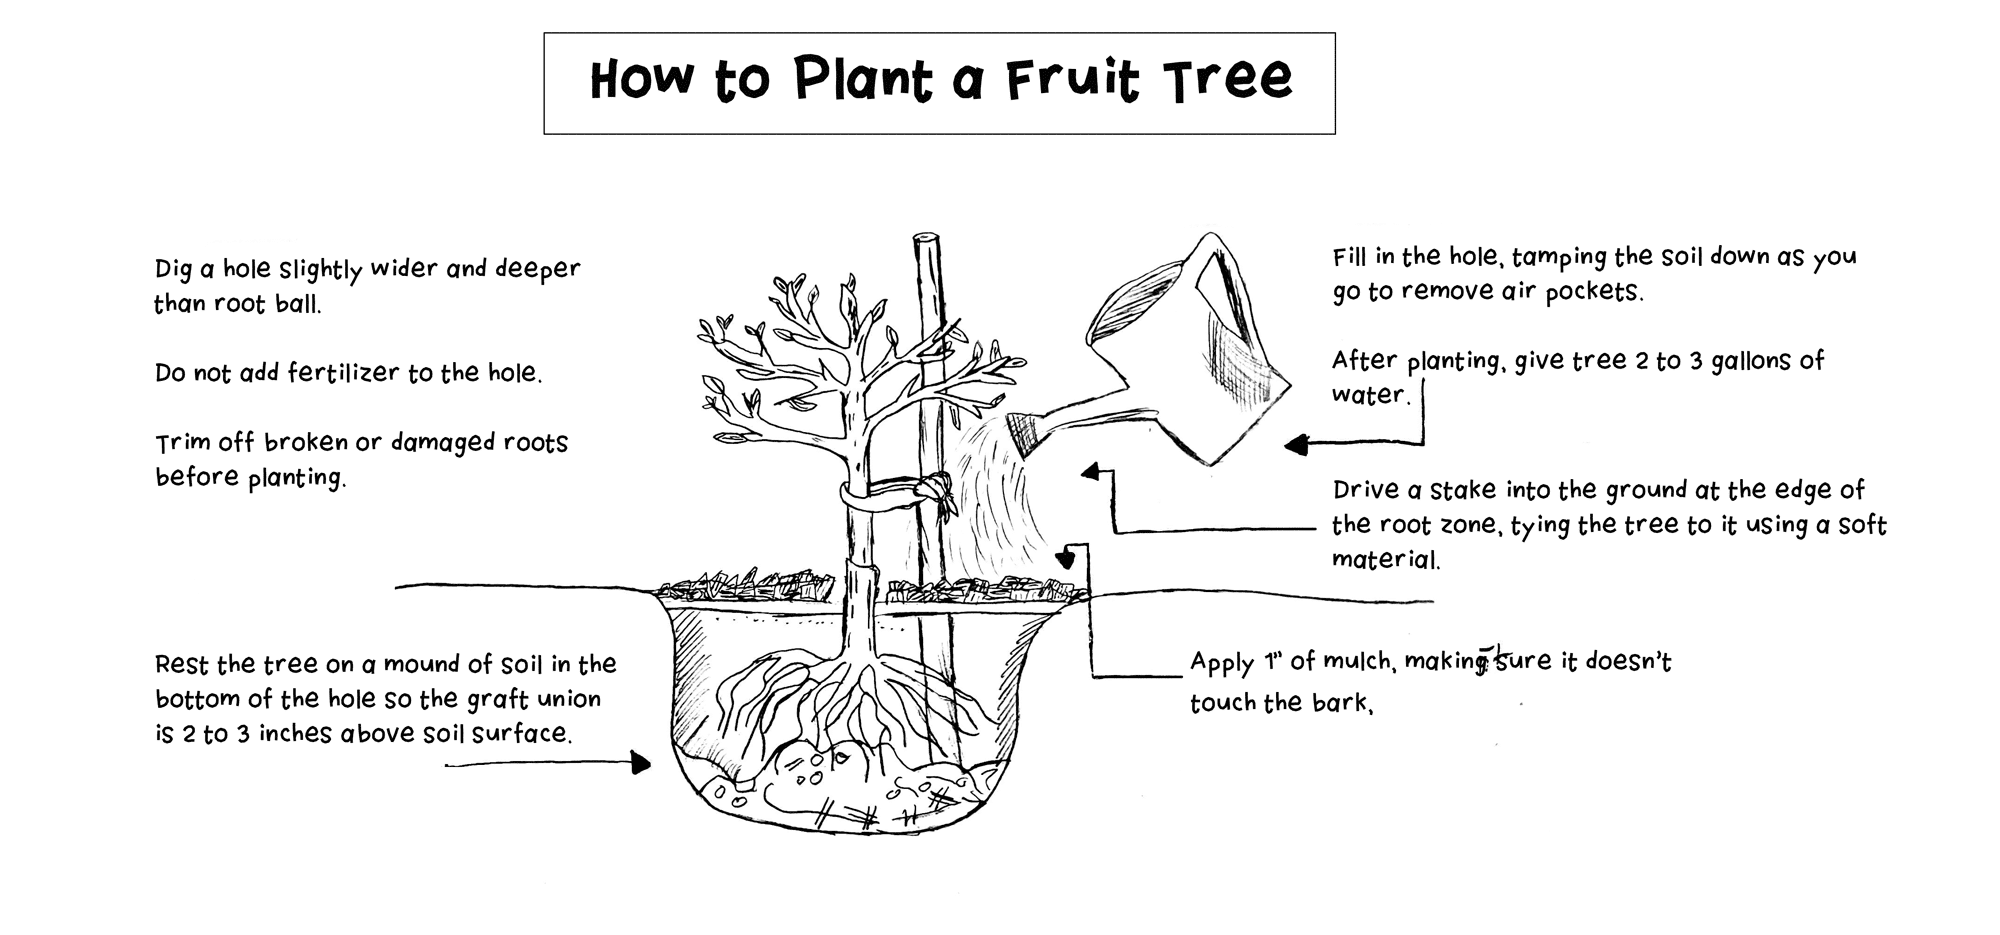 a guide to planting fruit trees - lawnstarter